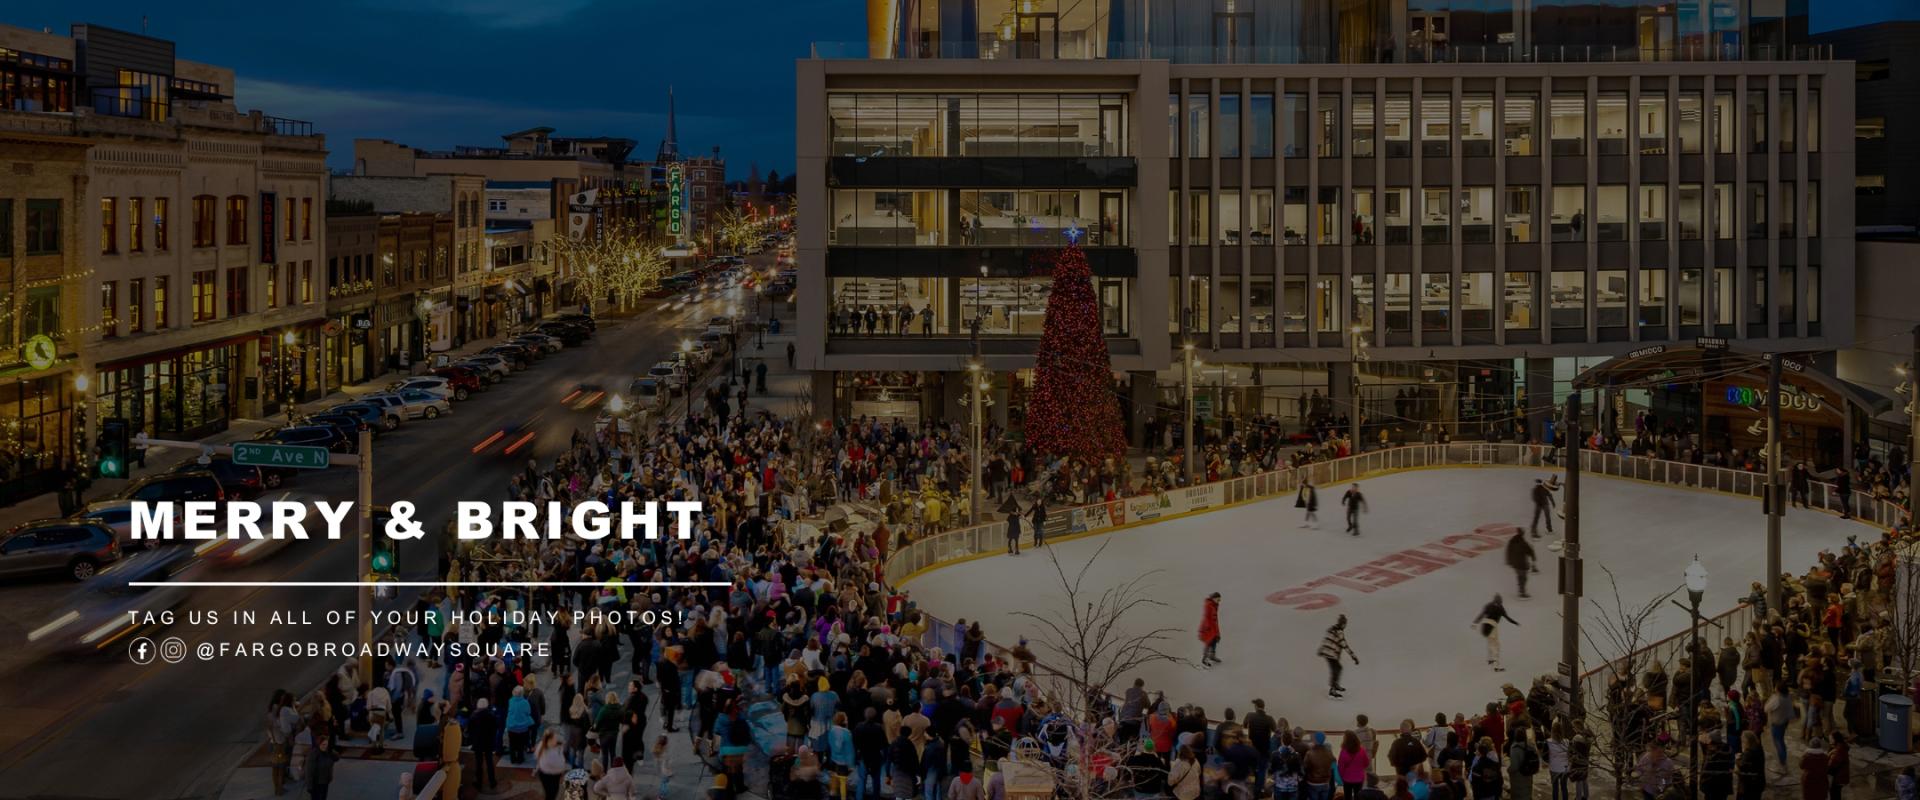 This slider shows broadway square tree lighting and says Merry & Bright, tag us in your holiday photos